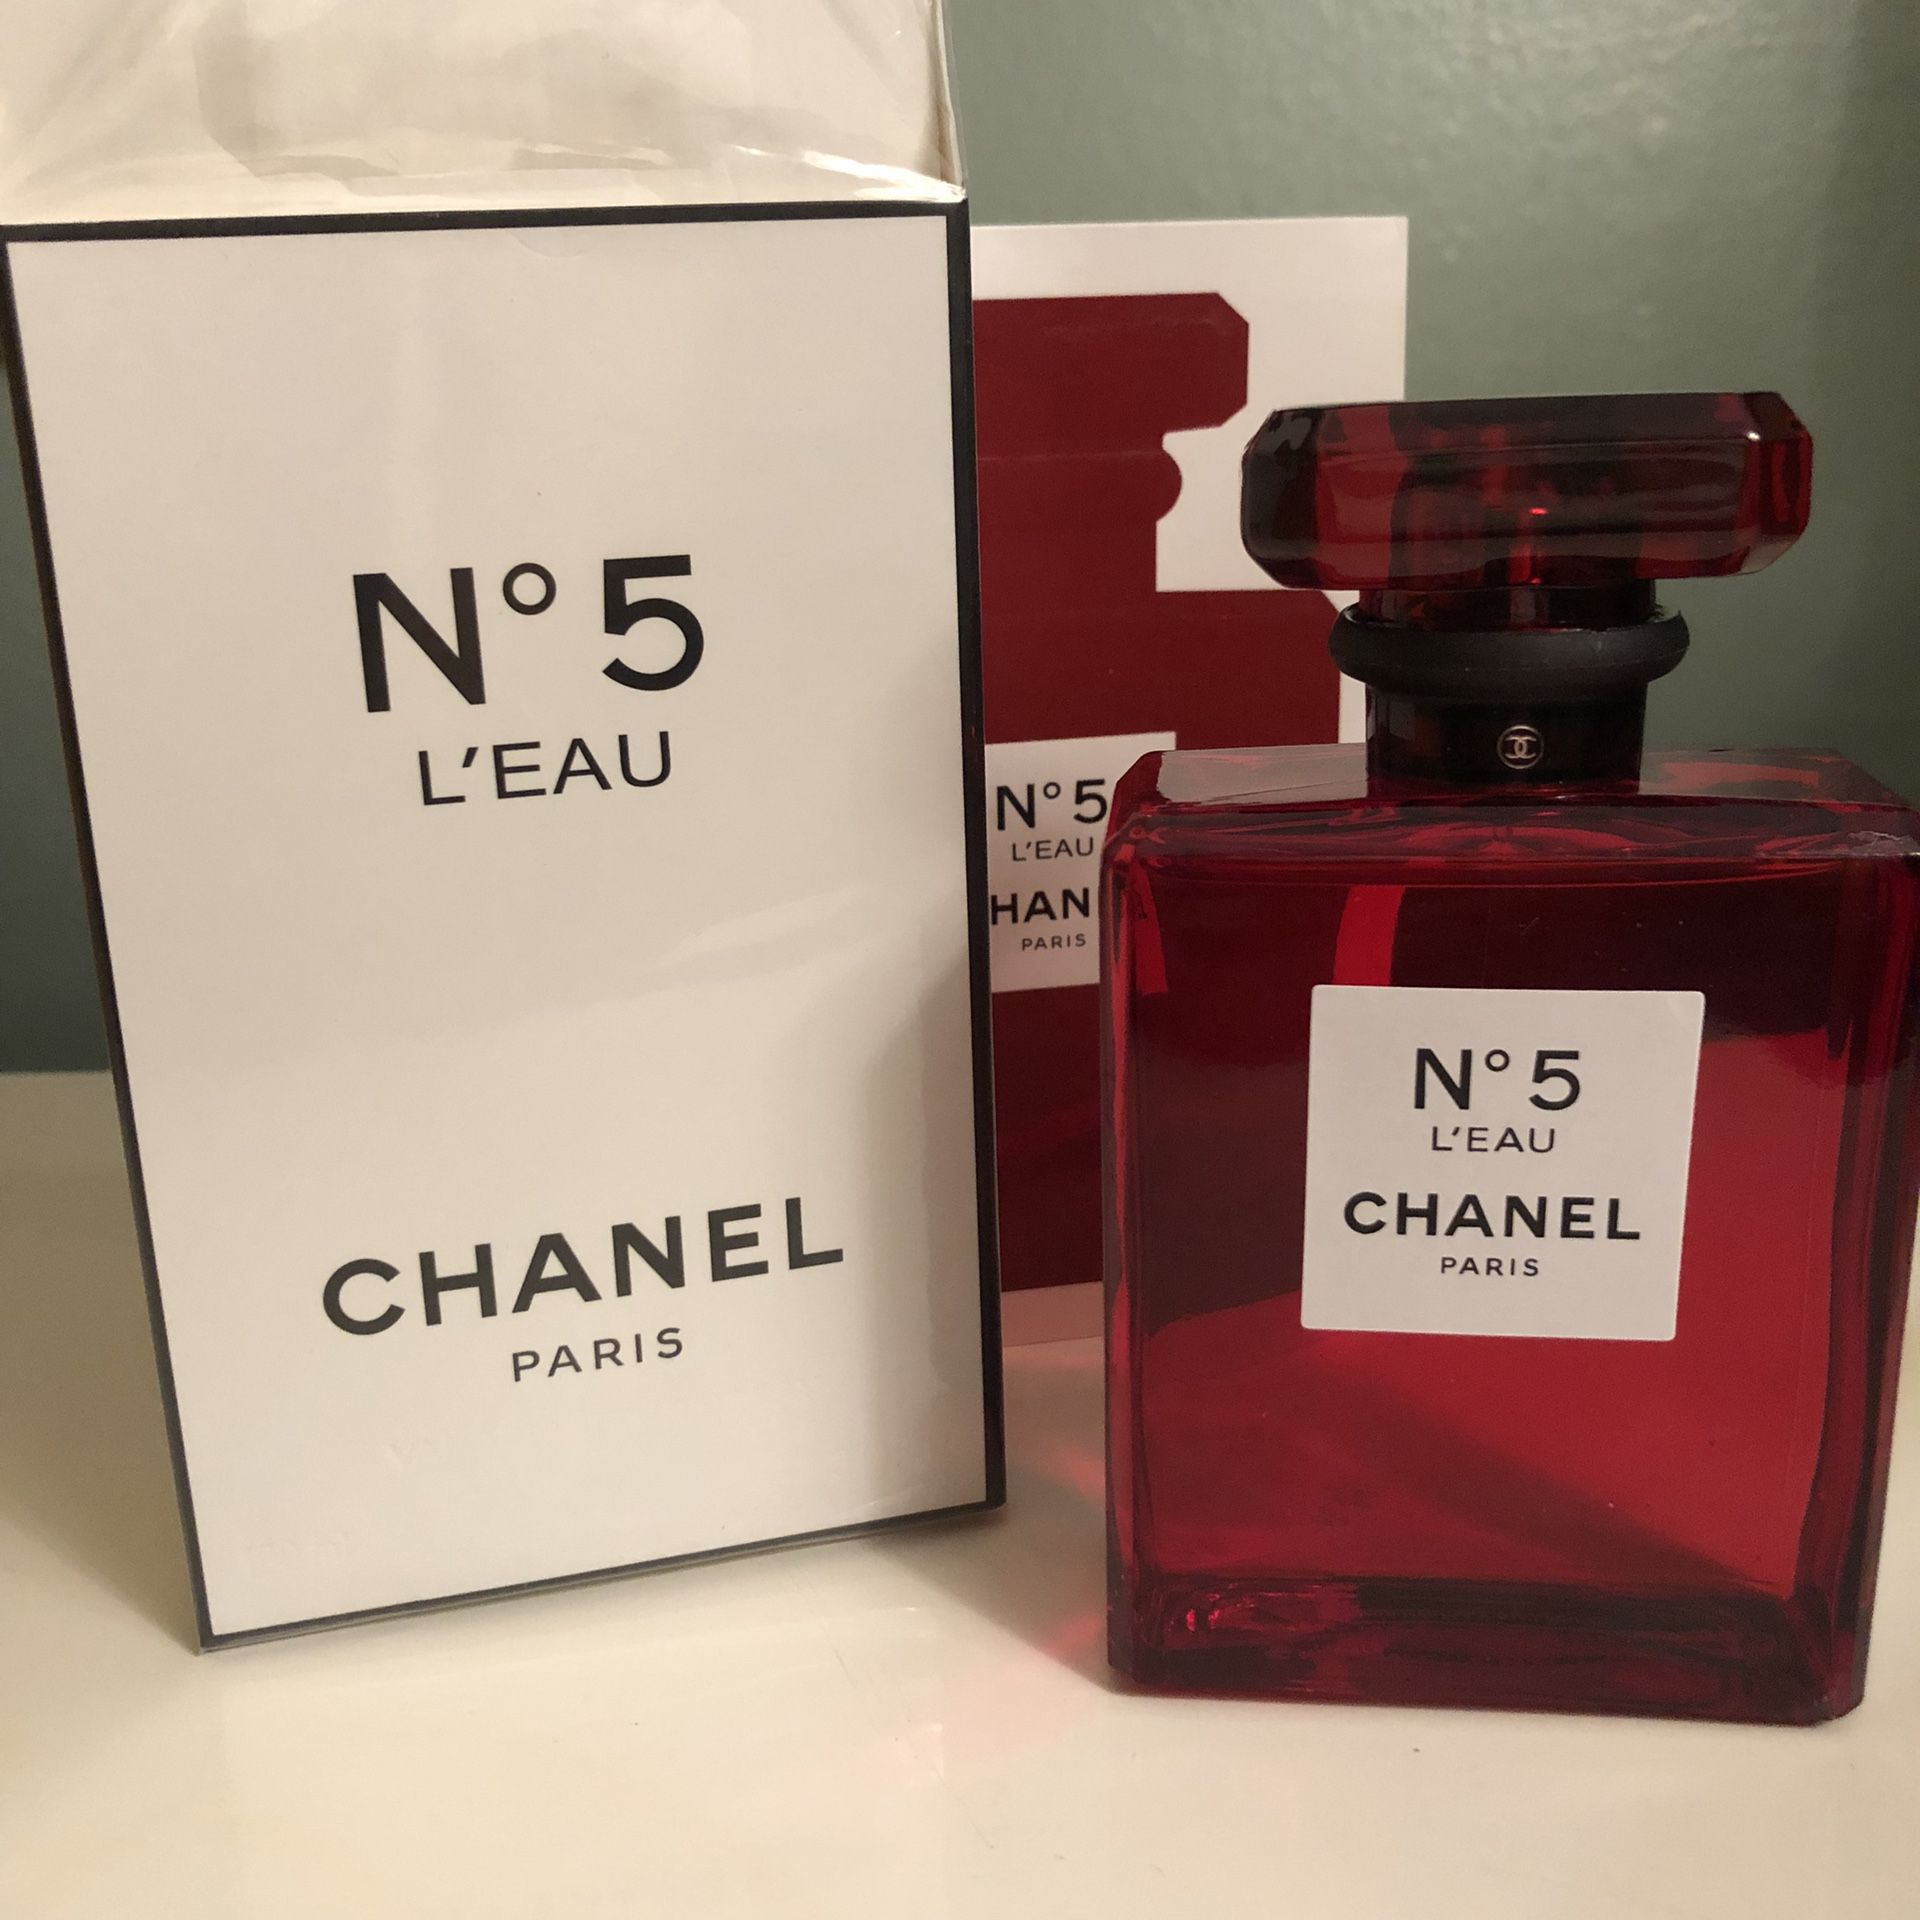 CHANEL No. 5 Rechargable Perfume Spray 1.7 Oz Half Full for Sale in Citrus  Heights, CA - OfferUp